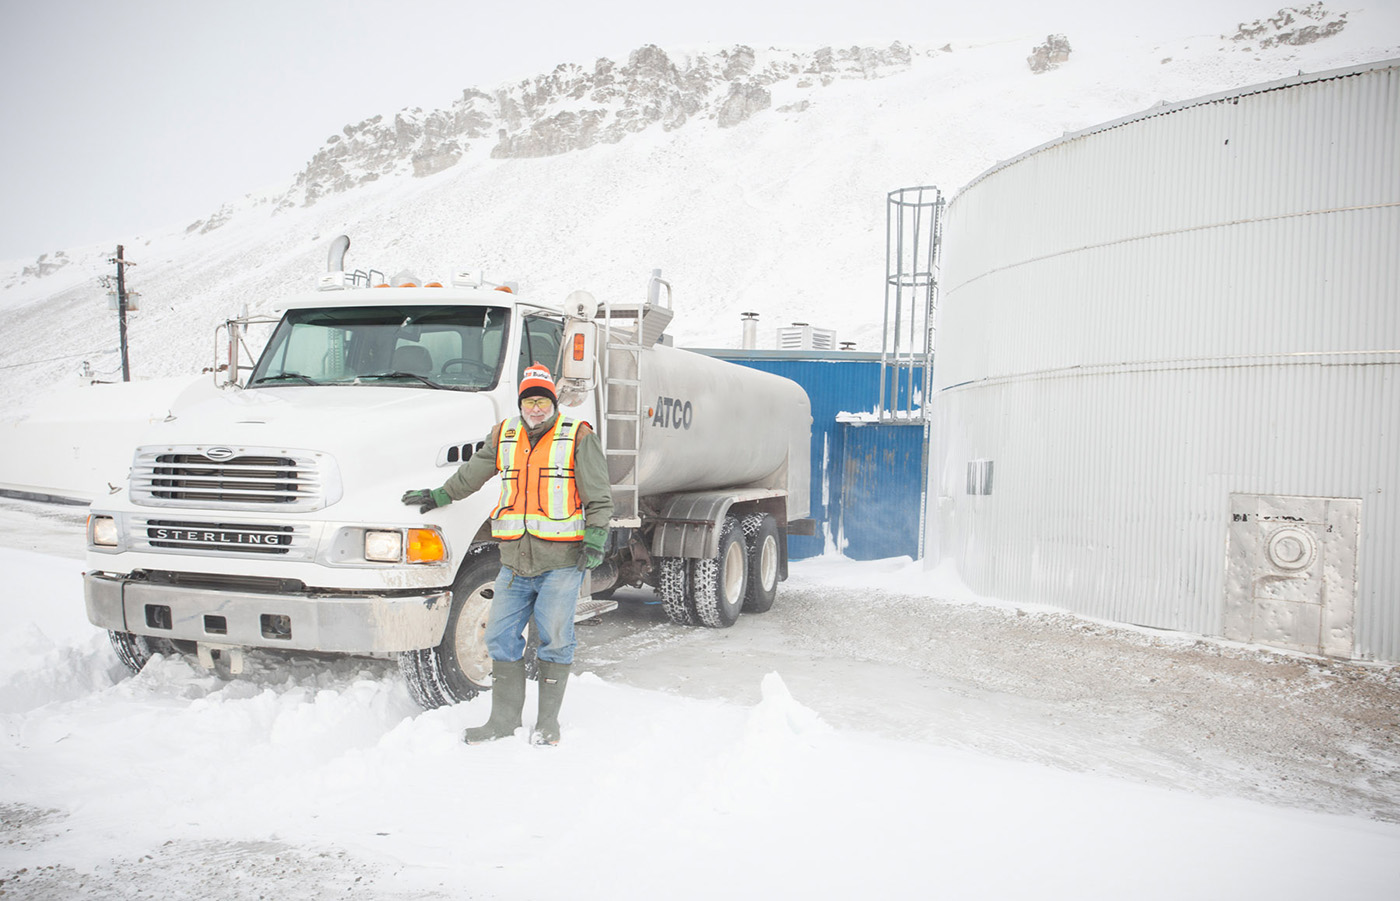 Resolute Bay Fuel Management